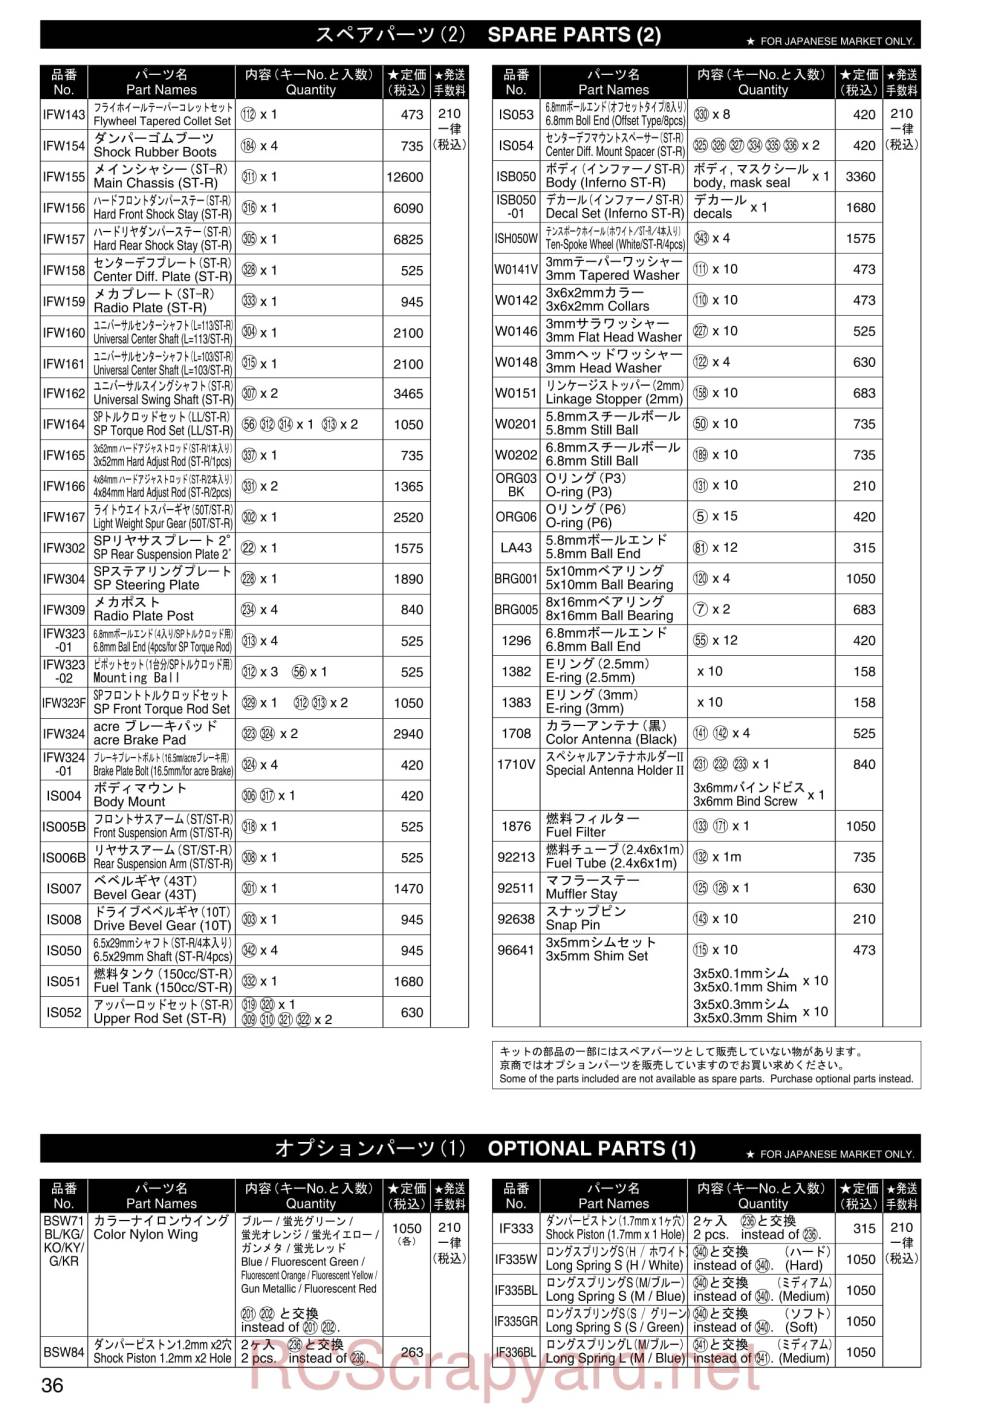 Kyosho Inferno ST R - 31352 - Parts - Page 3